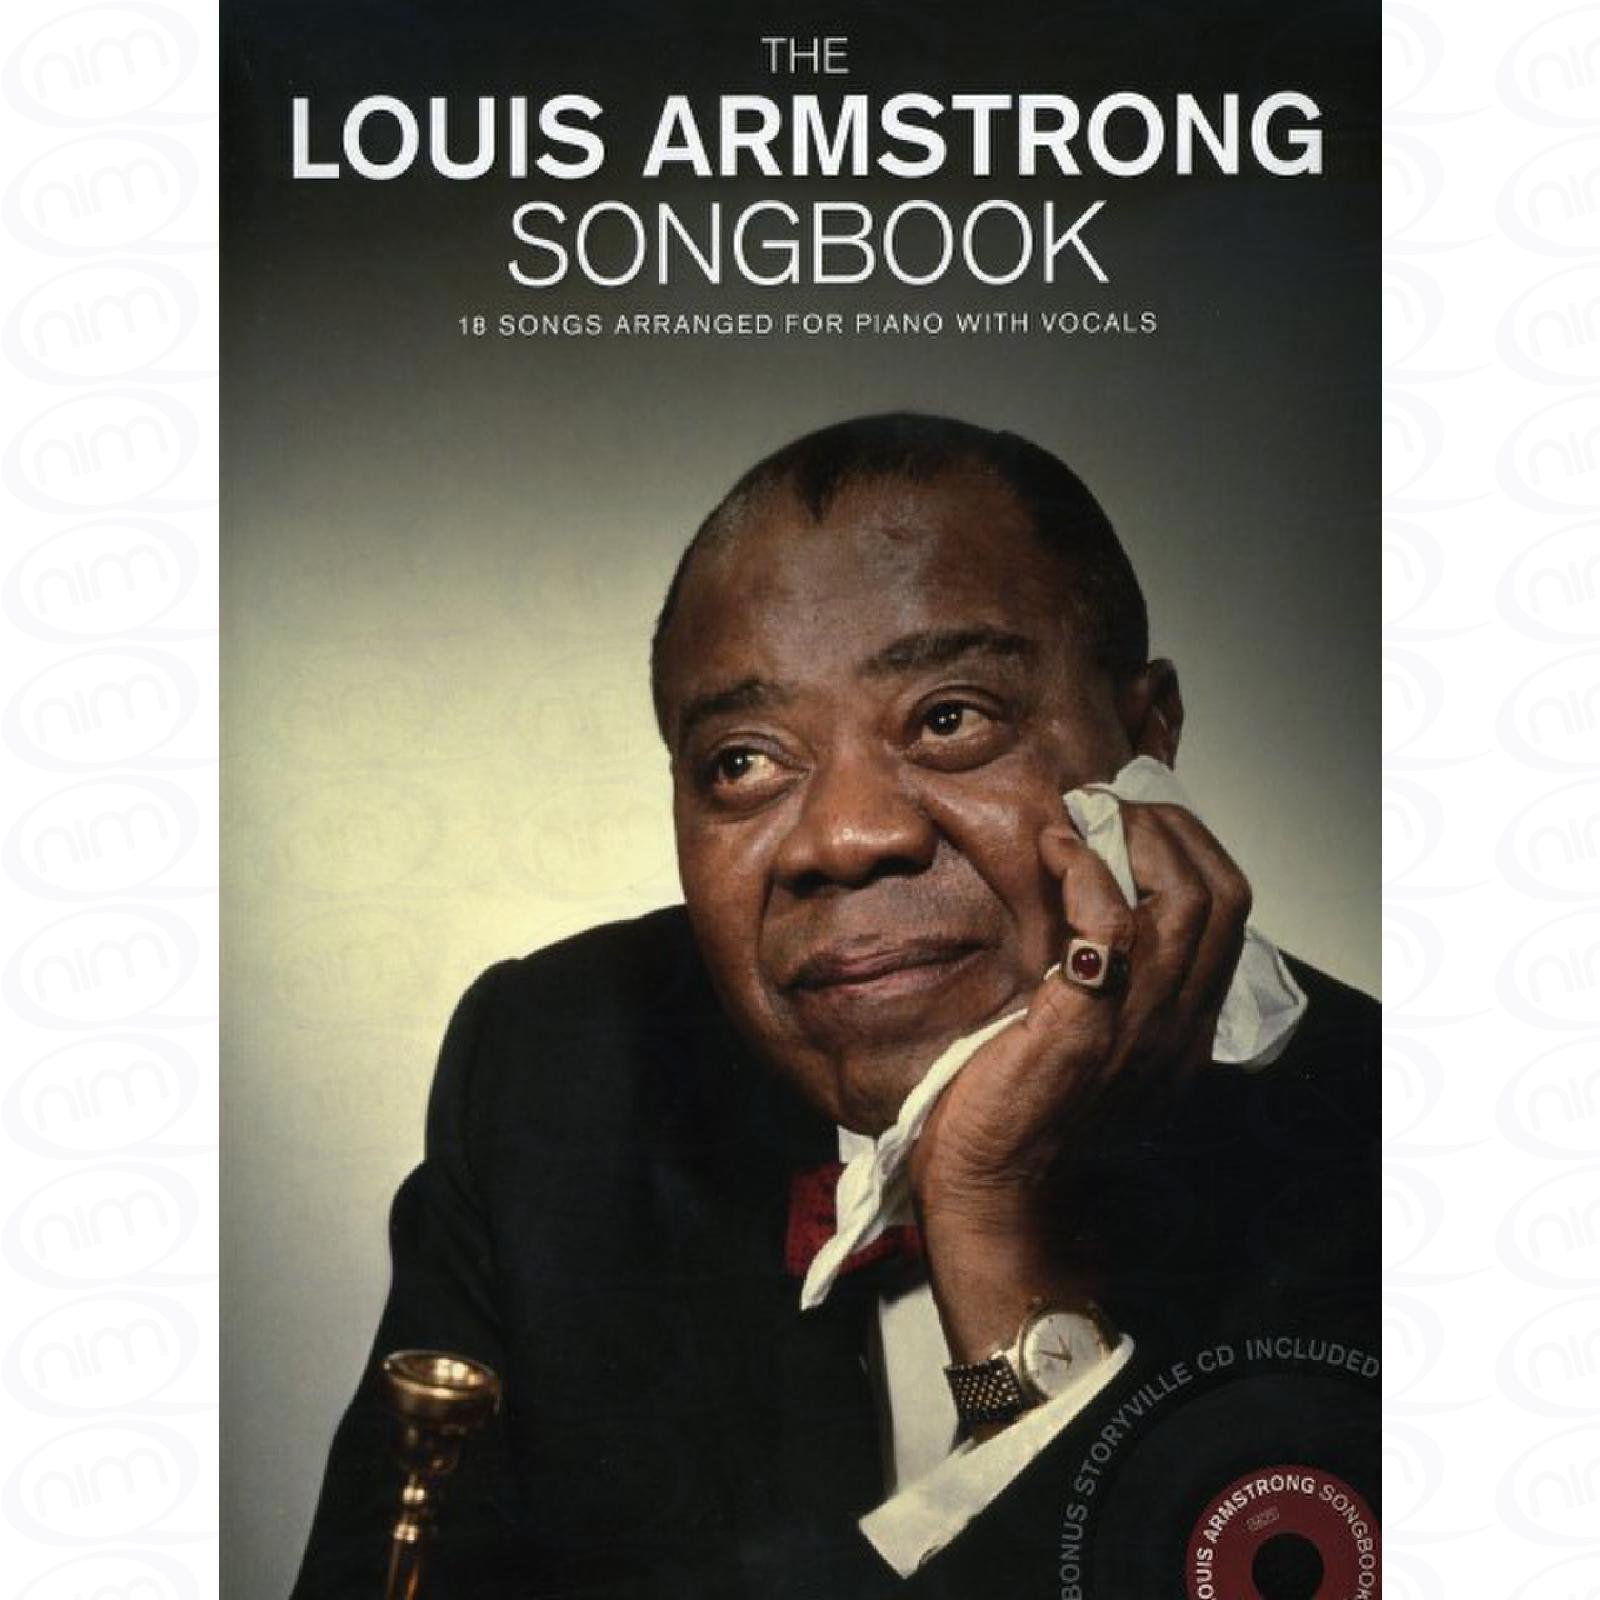 The Louis Armstrong Songbook - arrangiert für Songbook - mit CD [Noten/Sheetmusic] Komponist : ARMSTRONG LOUIS